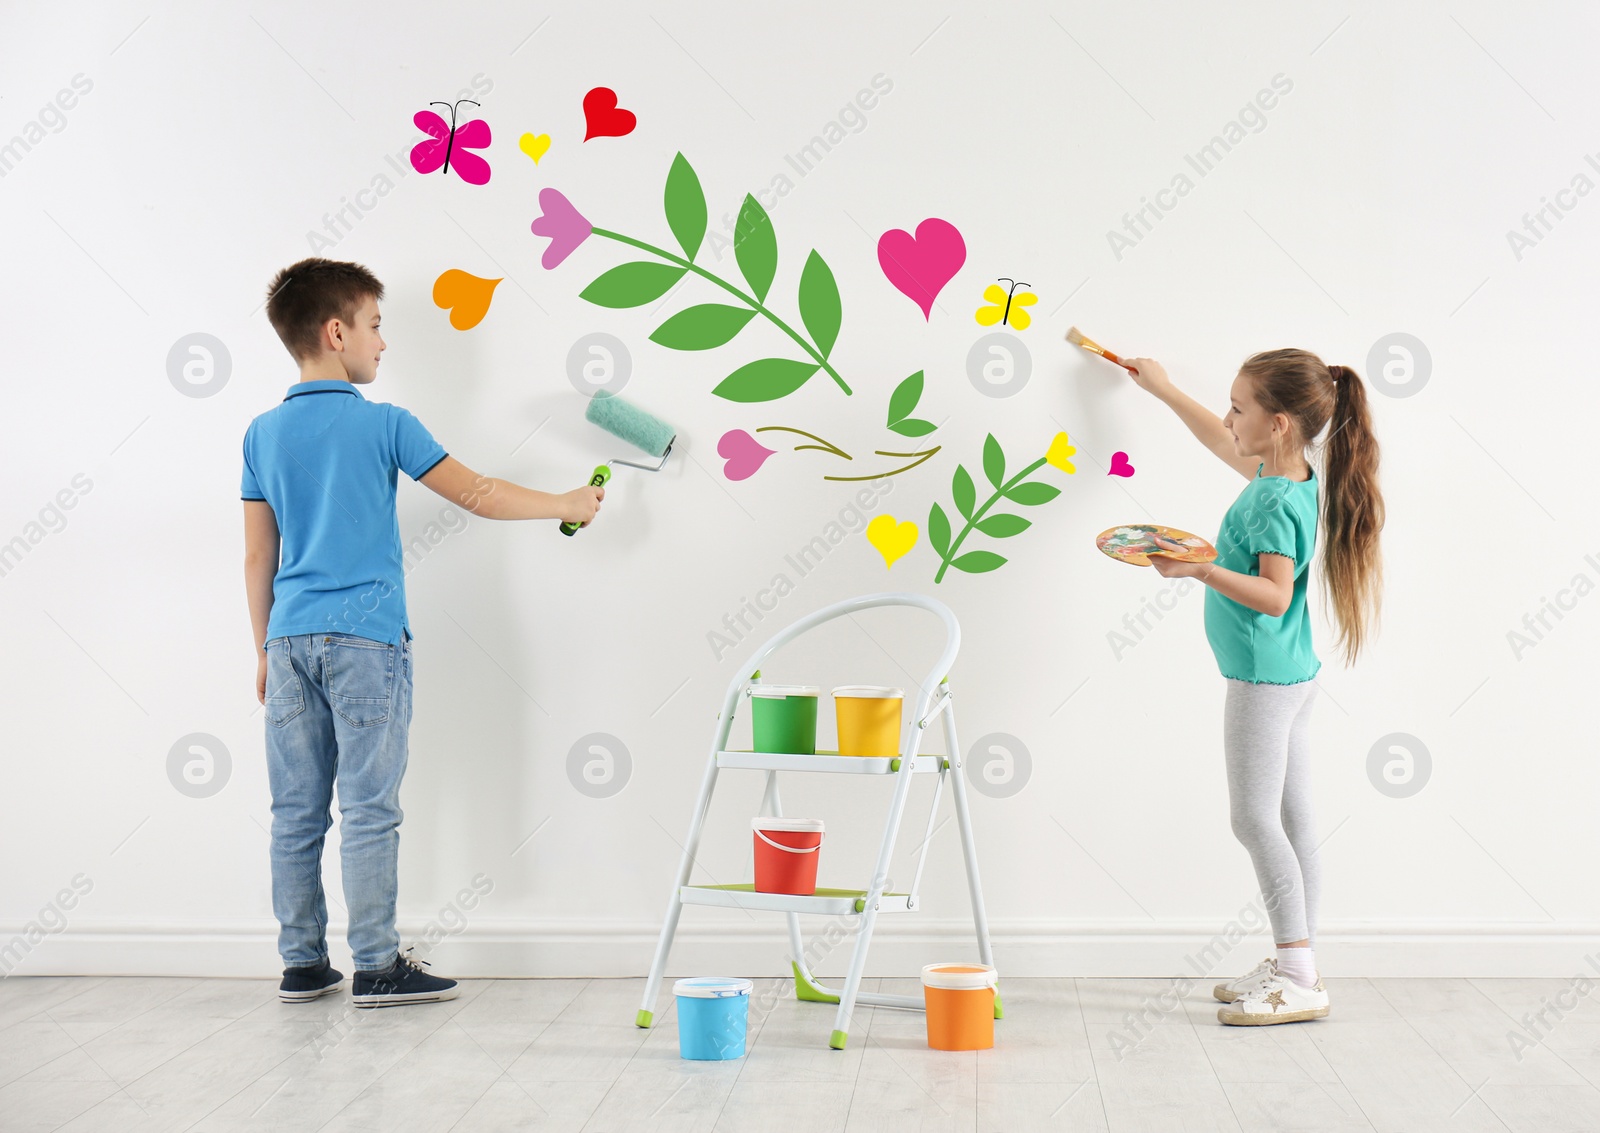 Image of Children drawing together on white wall indoors